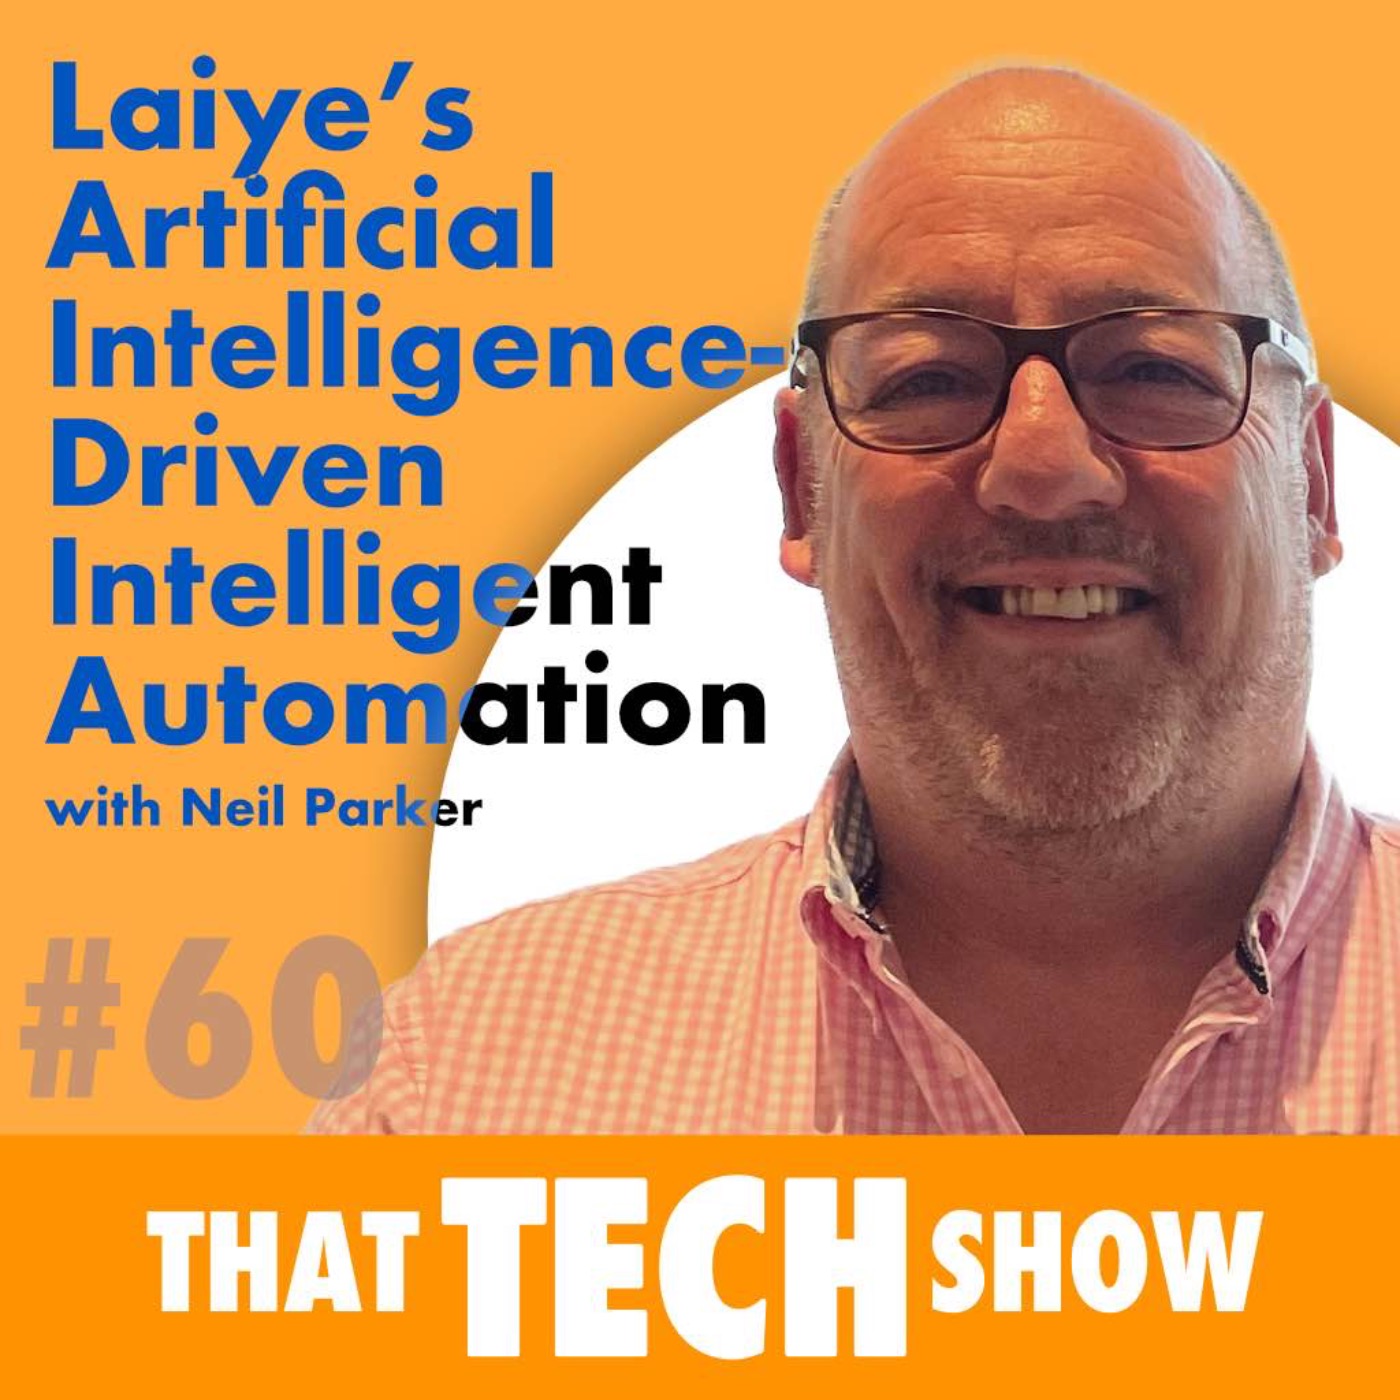 Episode 60 - Laiye's Artificial Intelligence-Driven Intelligent Automation with Neil Parker